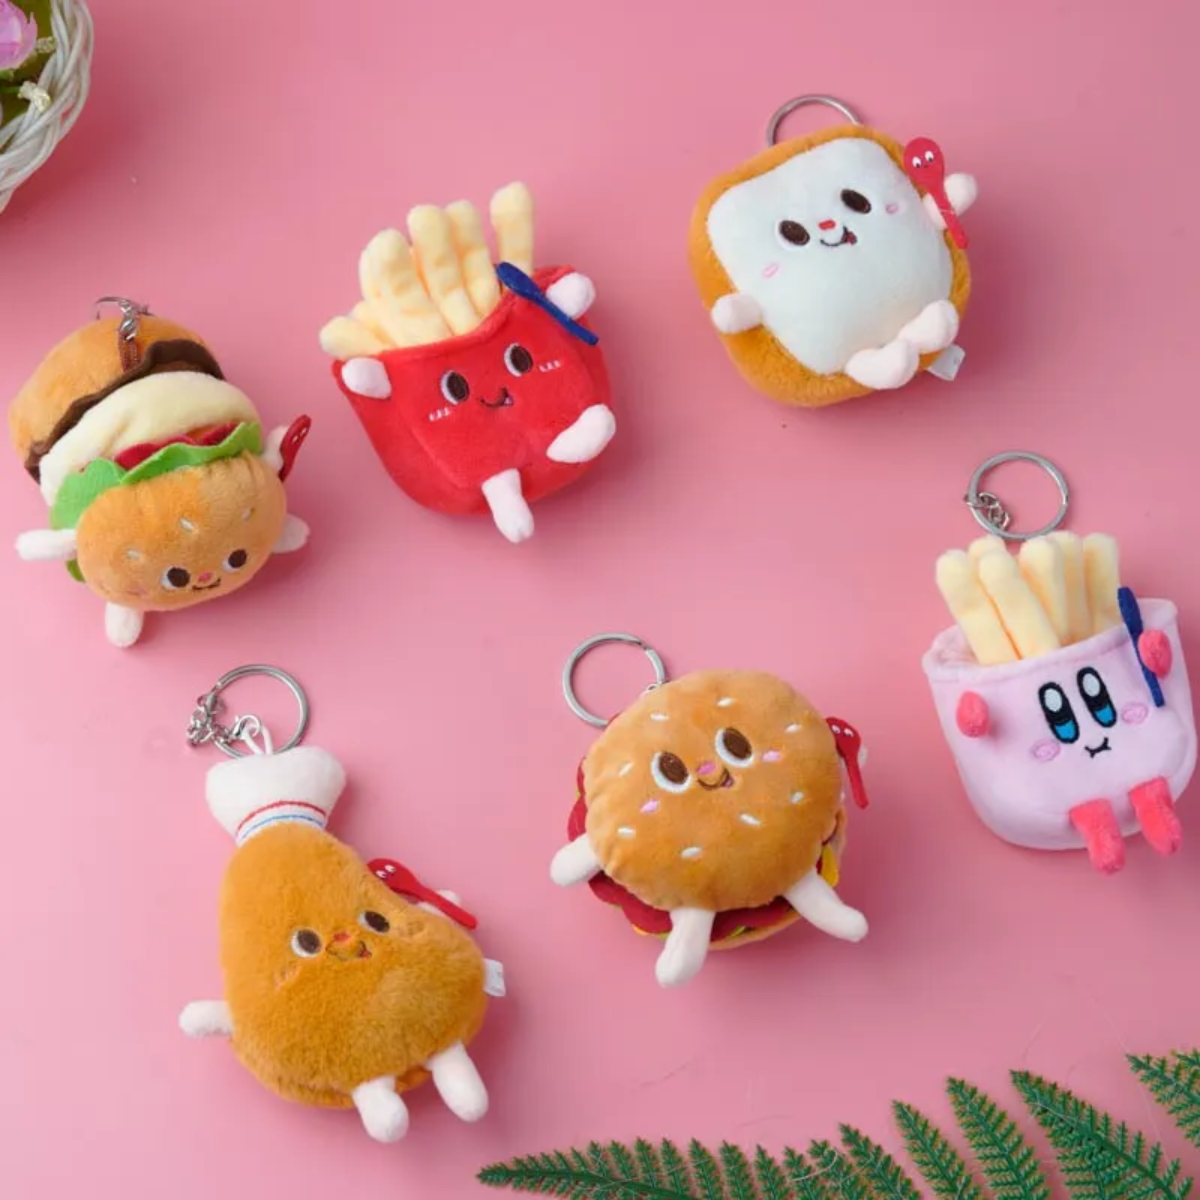 Fast-Foodie Plush Keychains – Cute 10cm Culinary Companions for On-The-Go!